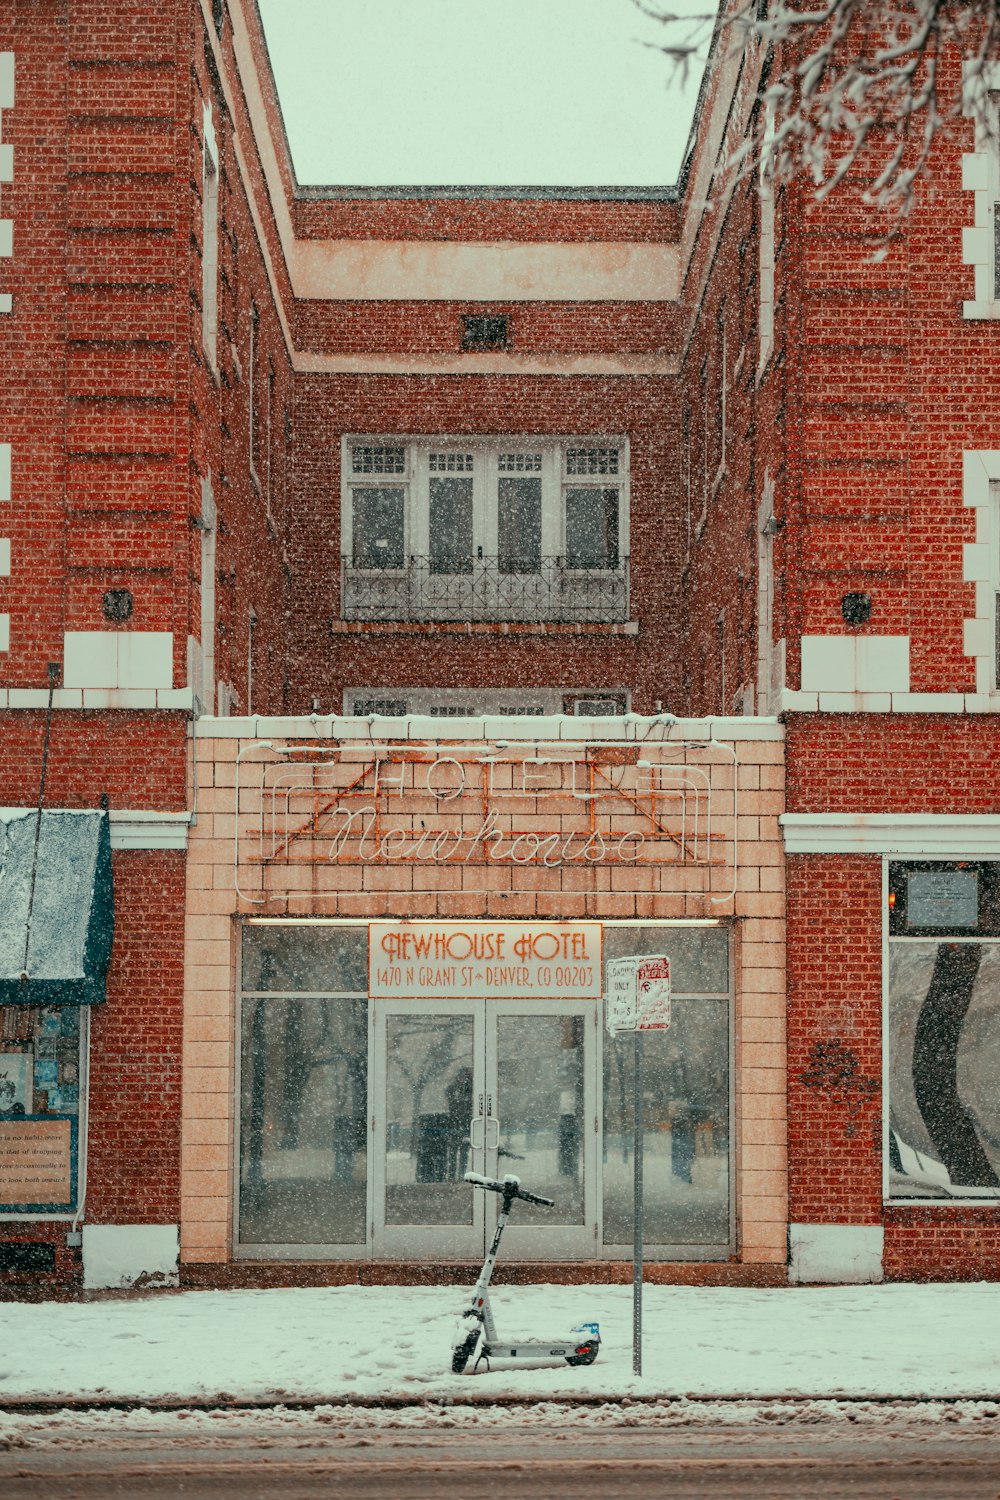 a bike parked in front of a red brick building